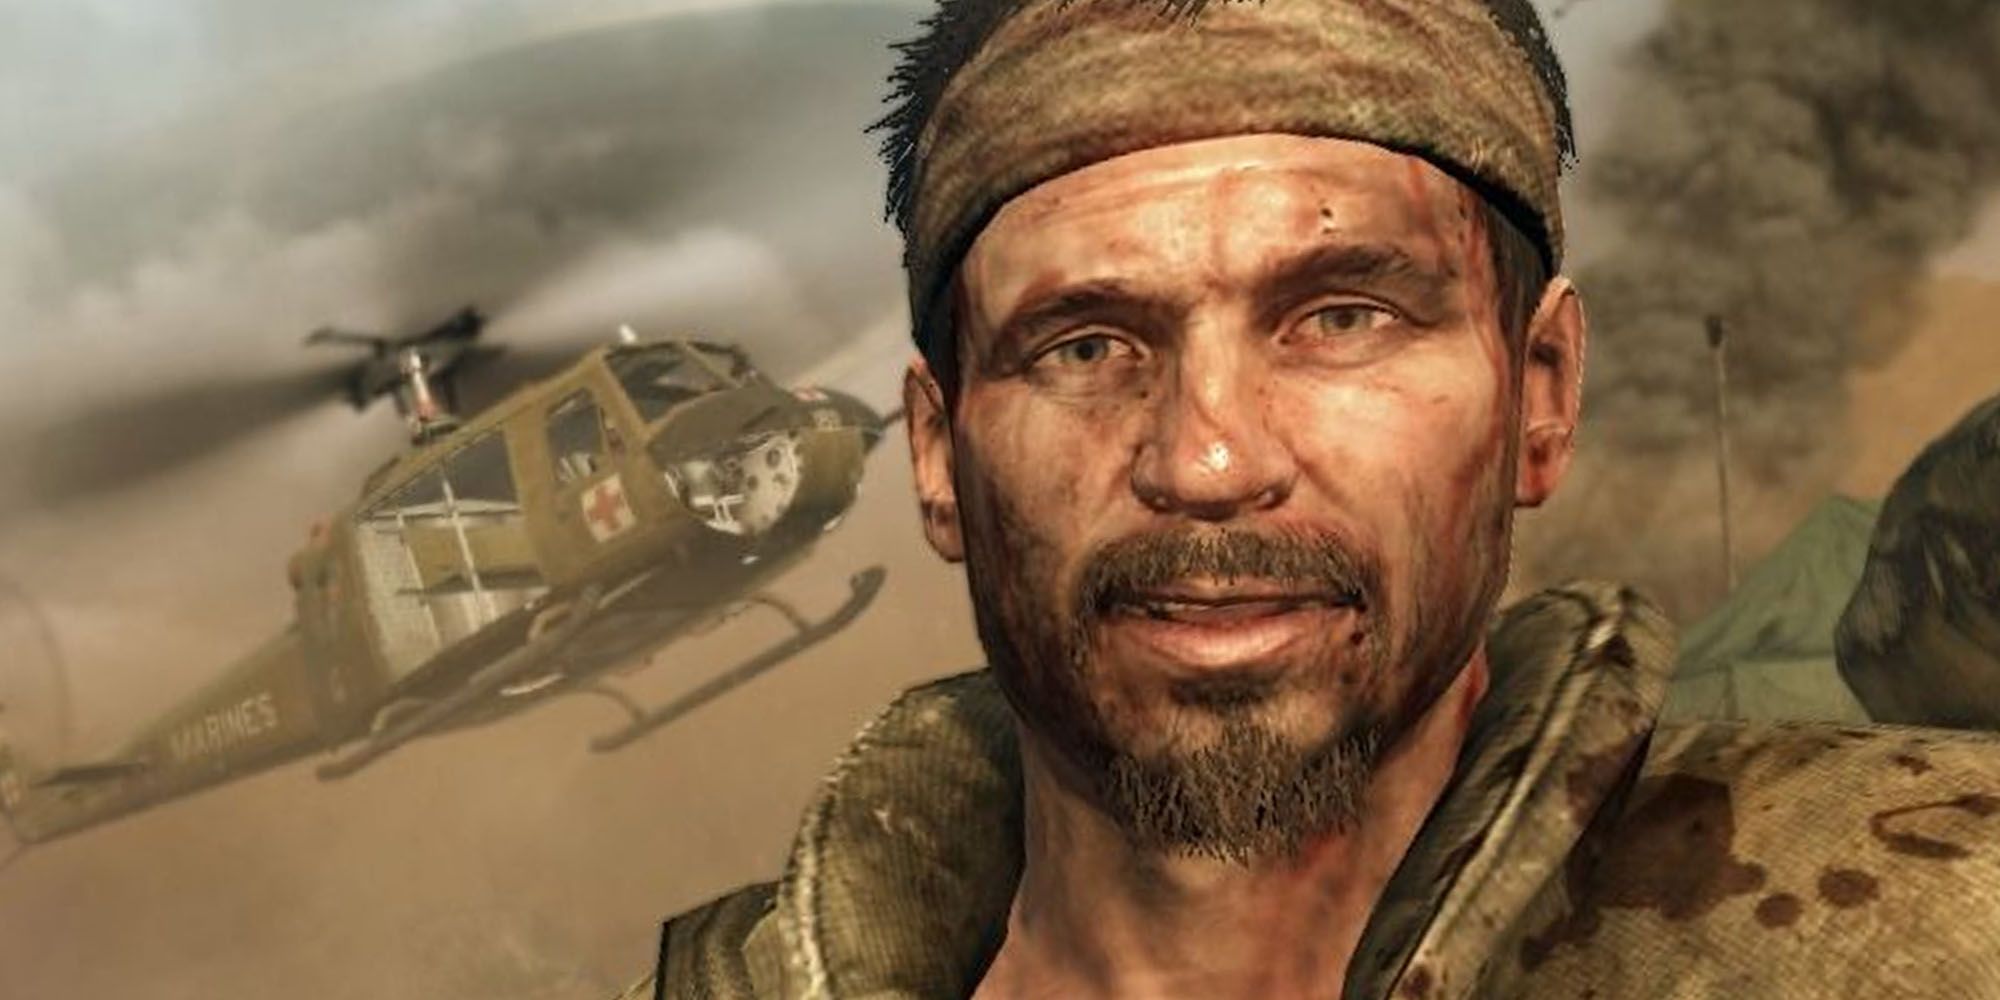 Call of Duty Black Ops Woods smiling at the camera while a medic helicopter lands behind him in the desert